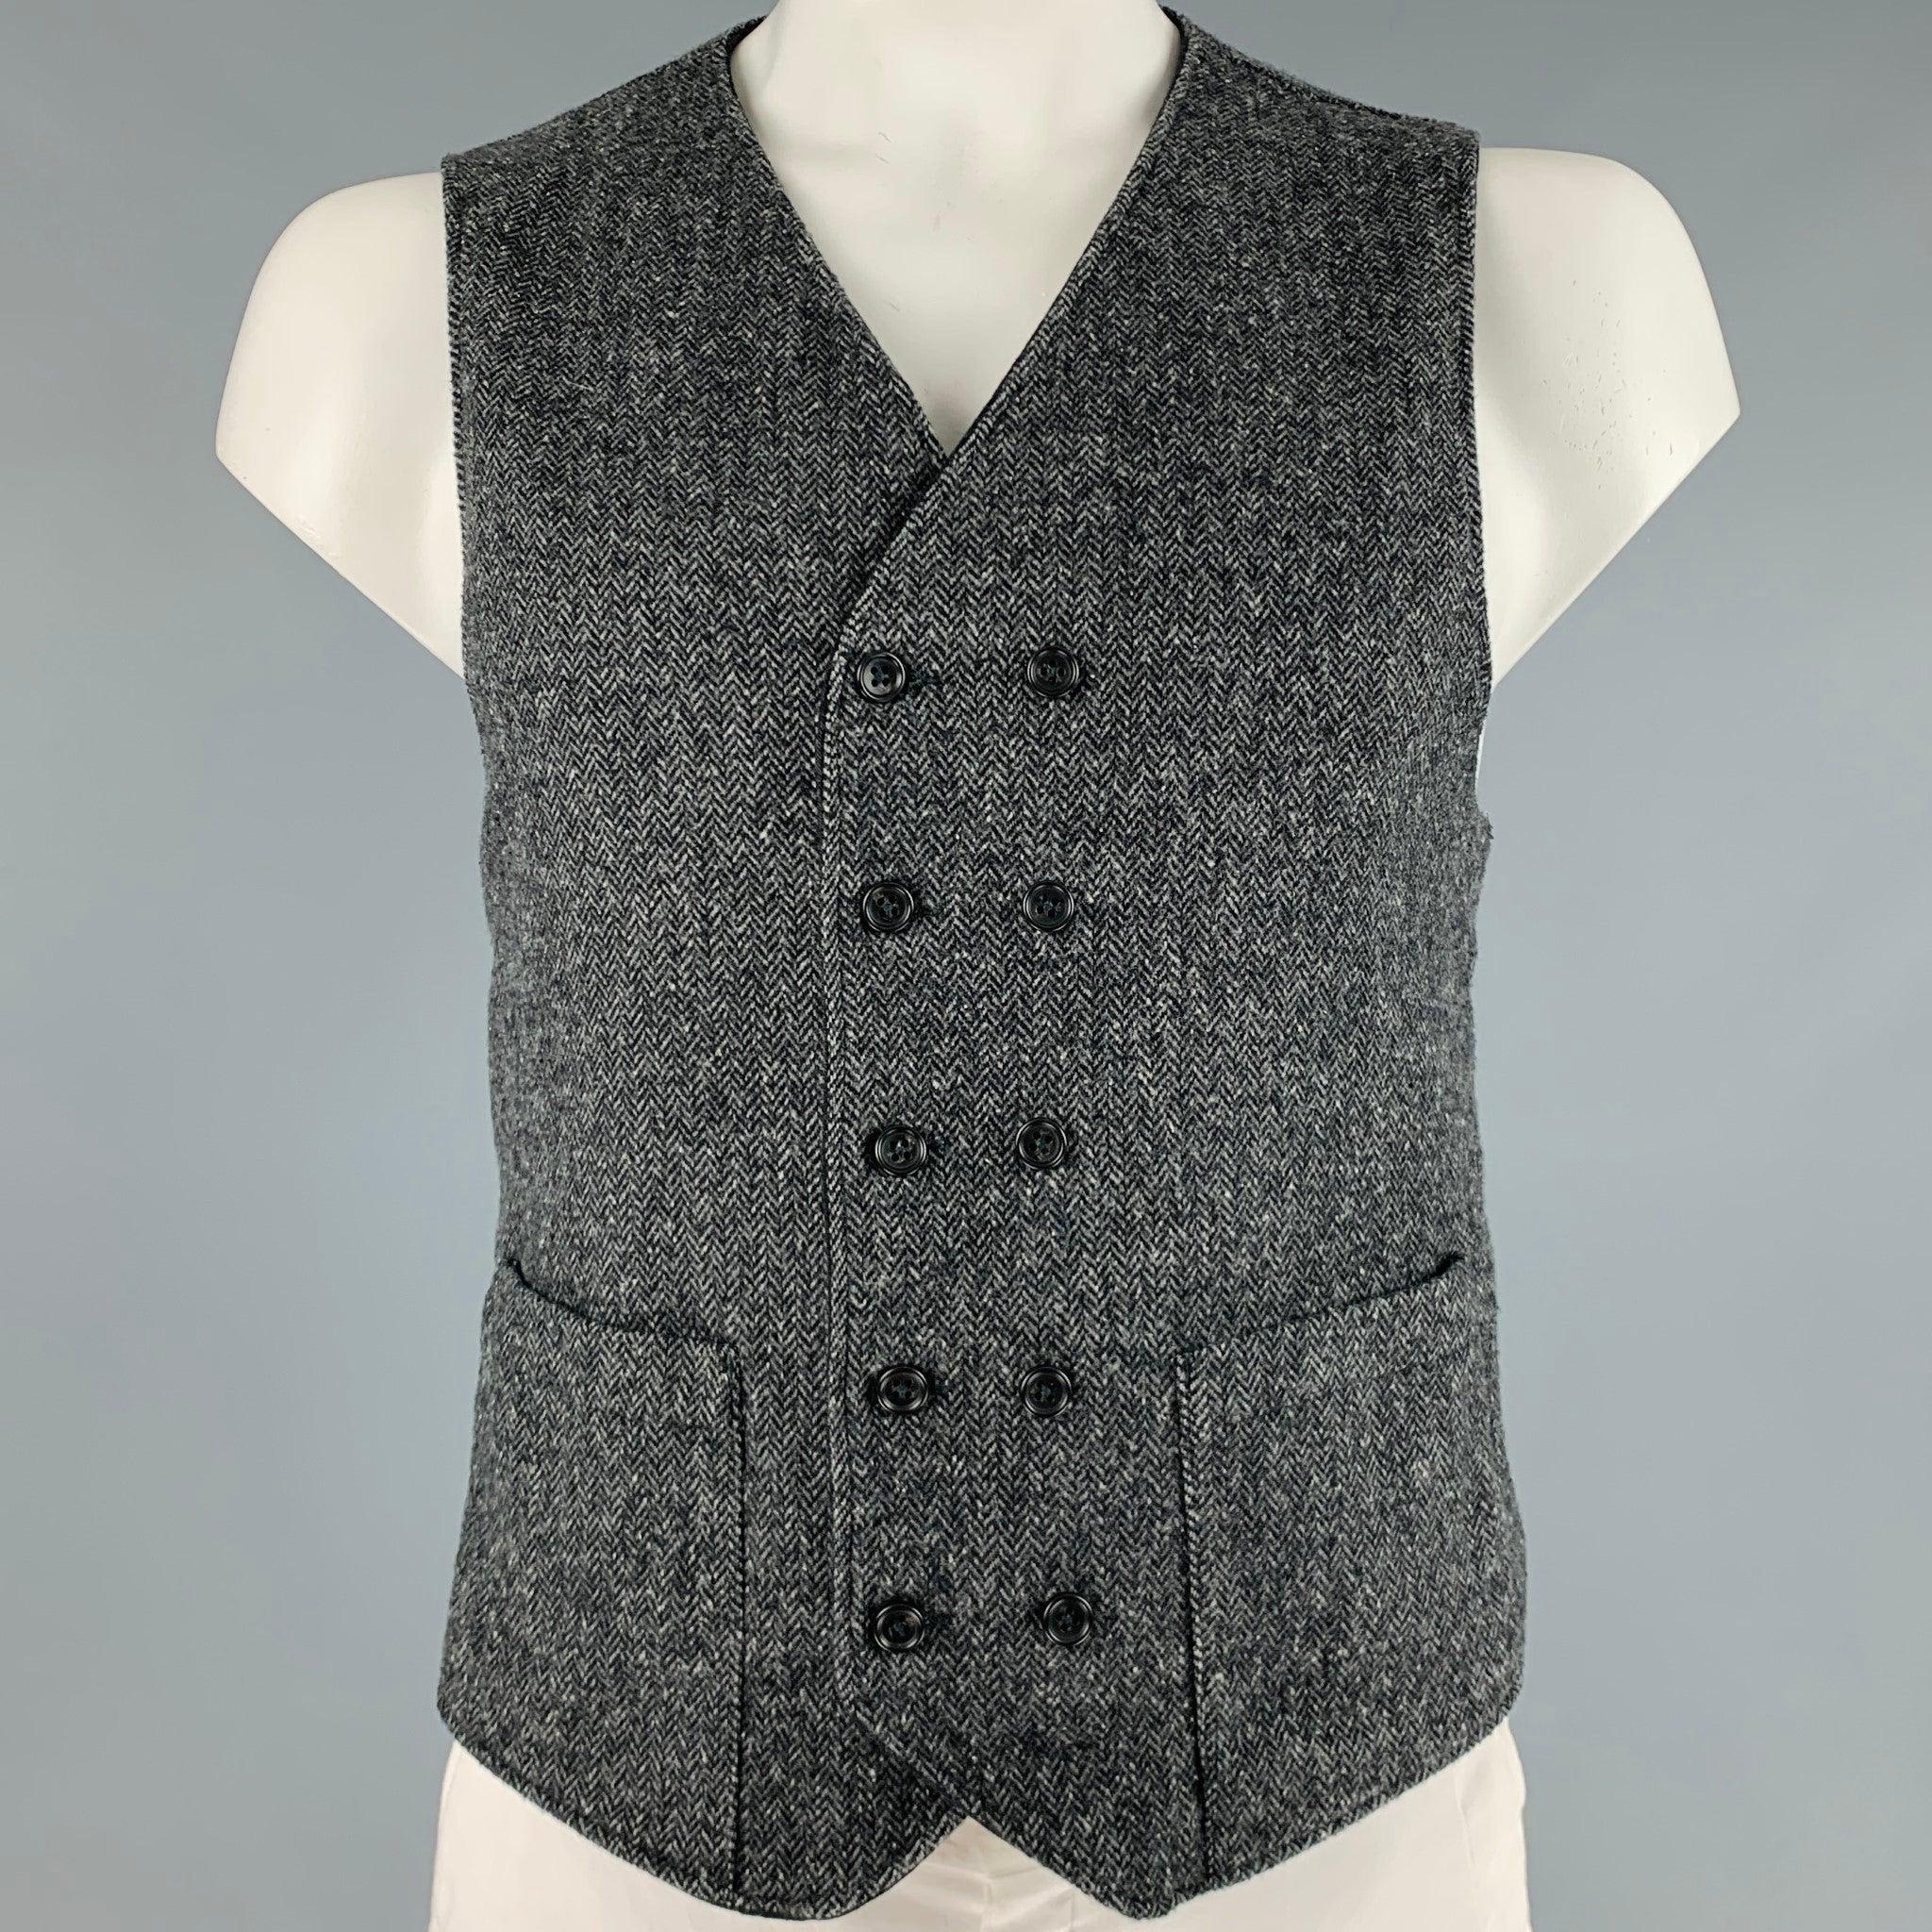 ENGINEERED GARMENTS vest
in a grey wool blend fabric featuring a reversible style with a herringbone pattern on one side and stripe pattern on the other, and double breasted button closure.Excellent Pre-Owned Condition. 

Marked:   L 

Measurements: